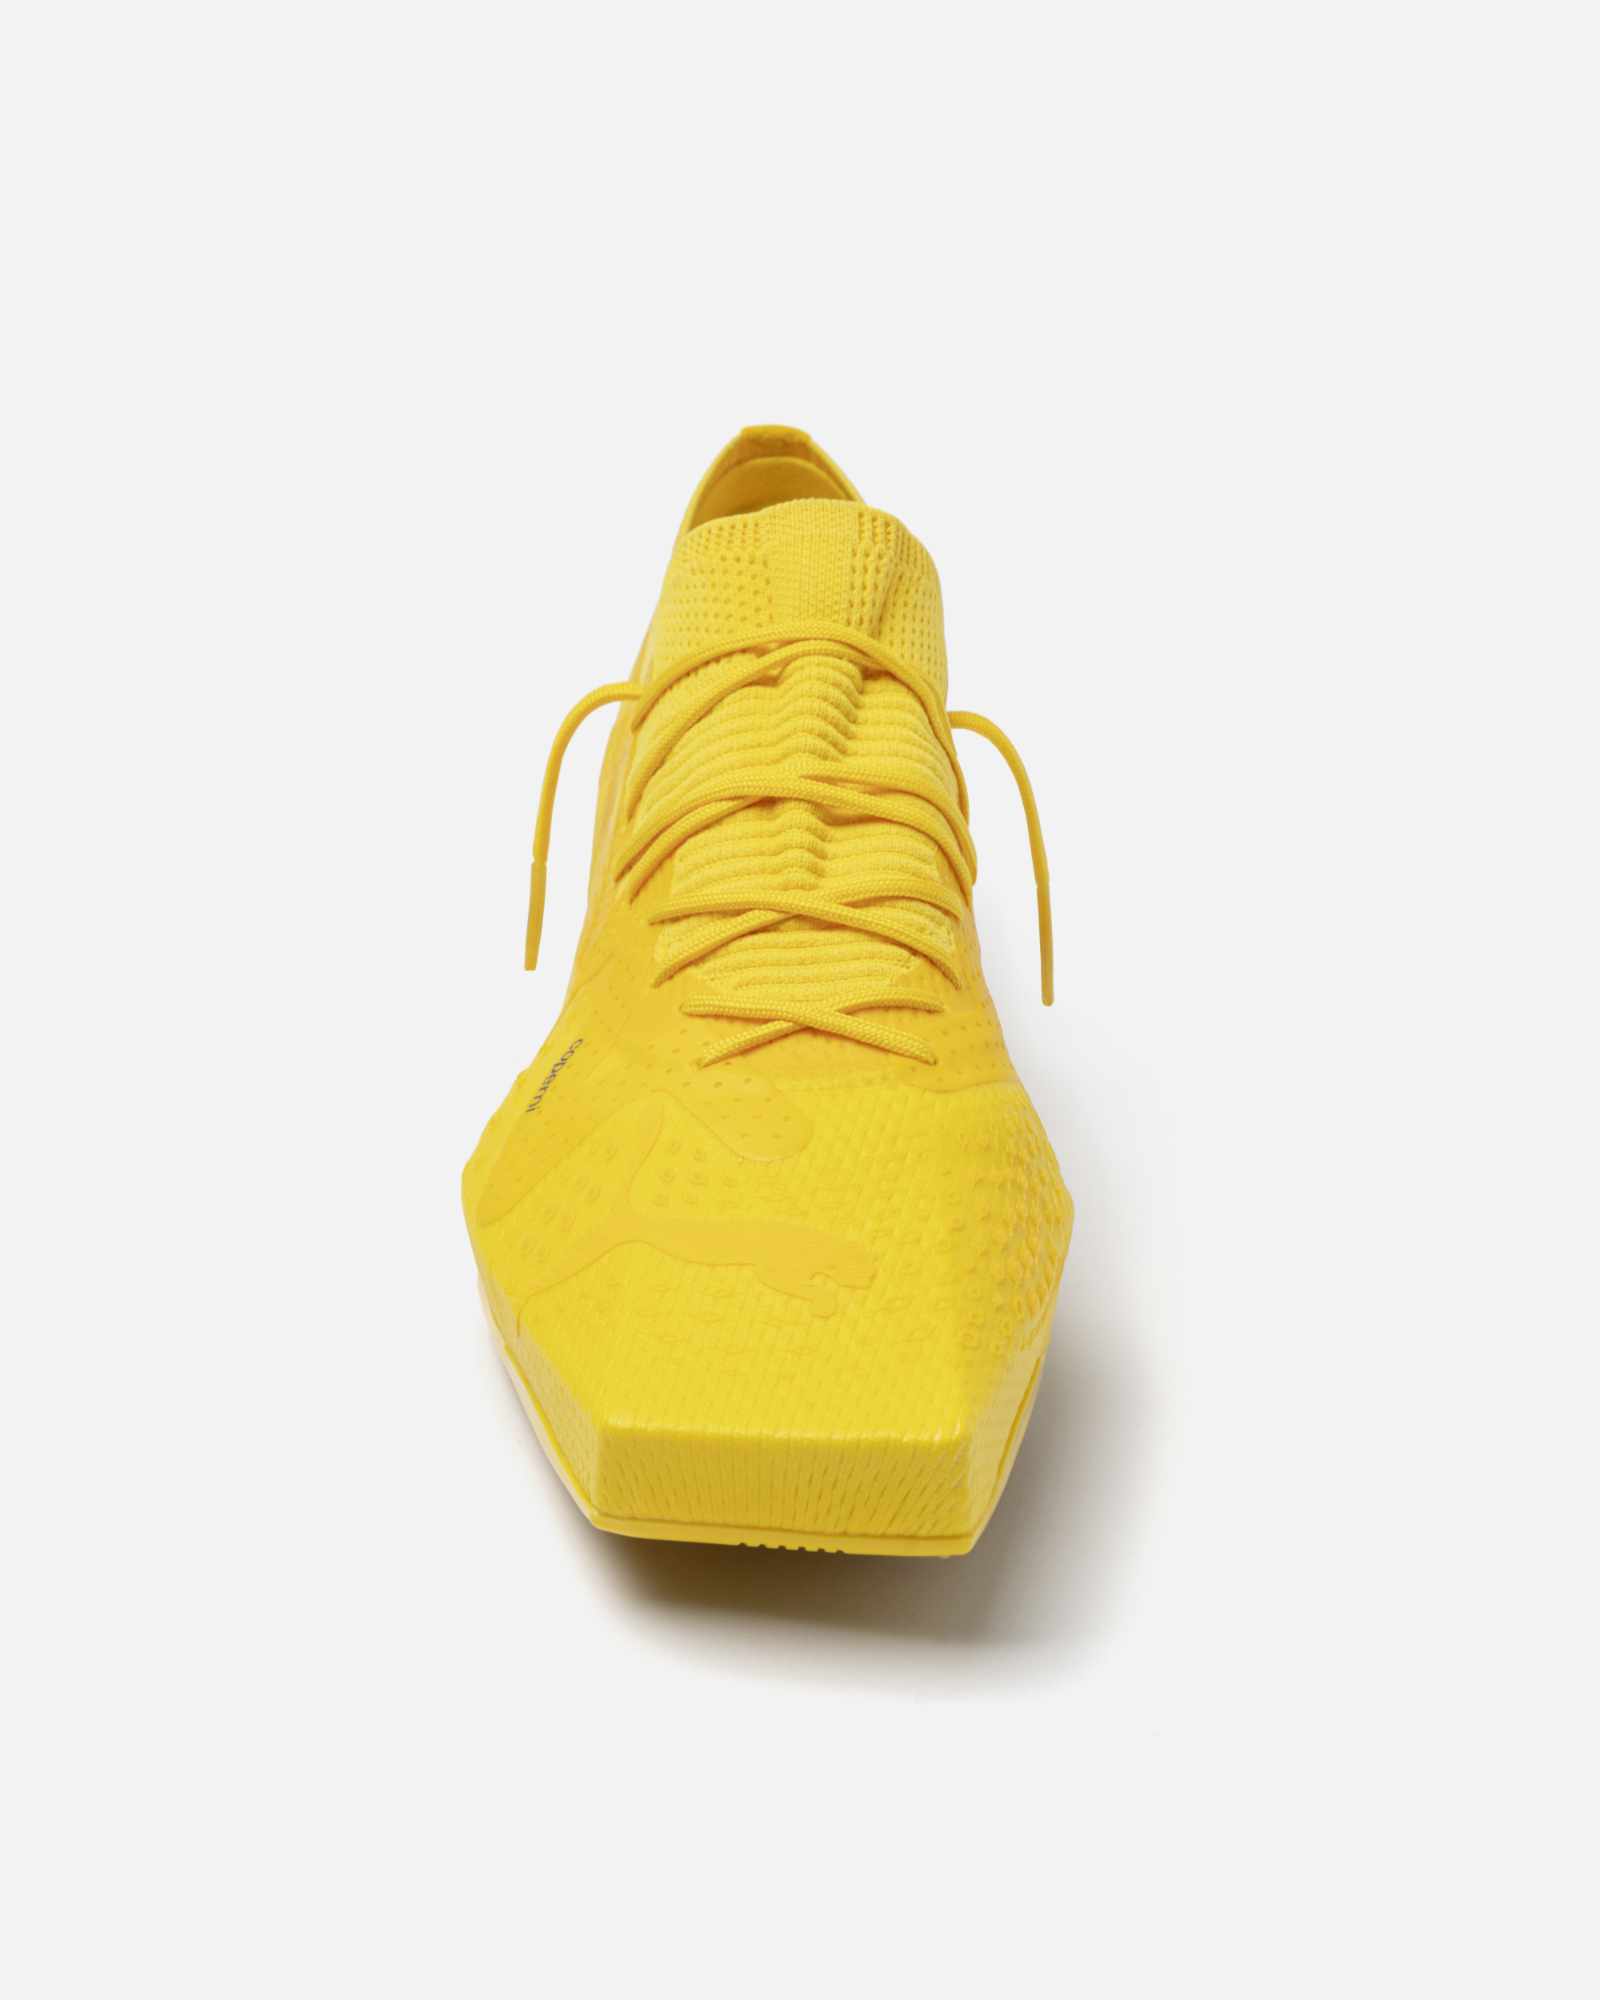 Product photos of Coperni & PUMA's collaborative sneaker in black, white and yellow colorways